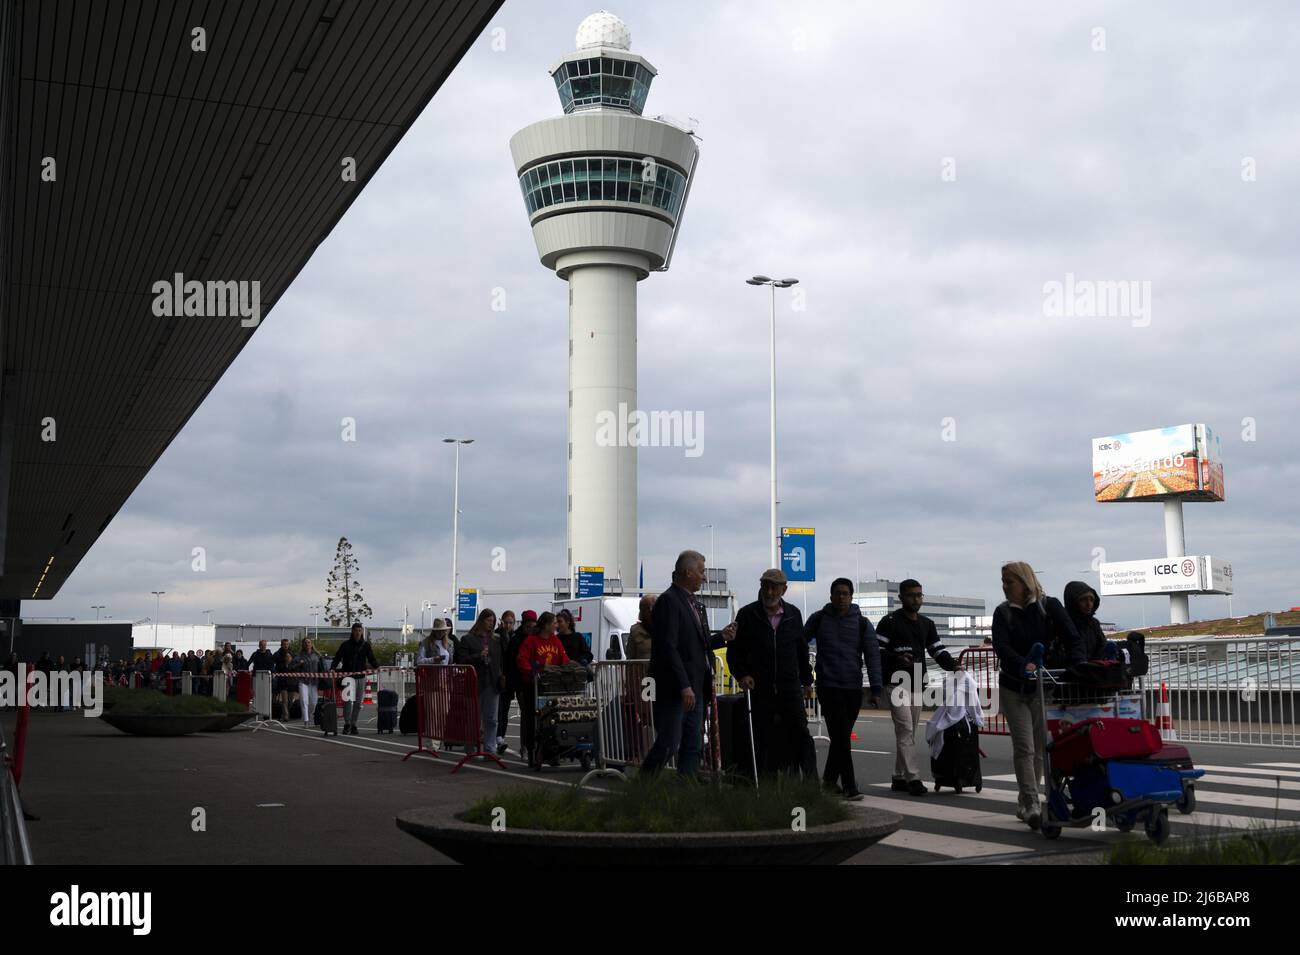 Schiphol, Netherlands. 30th Apr, 2022. 2022-04-30 07:40:29 SCHIPHOL - Schiphol Airport is very busy this weekend. The airport is facing serious staff shortages because there are hundreds of vacancies at the check-in desks, security and in the baggage basement that cannot be filled. ANP EVERT ELZINGA netherlands out - belgium out Credit: ANP/Alamy Live News Stock Photo